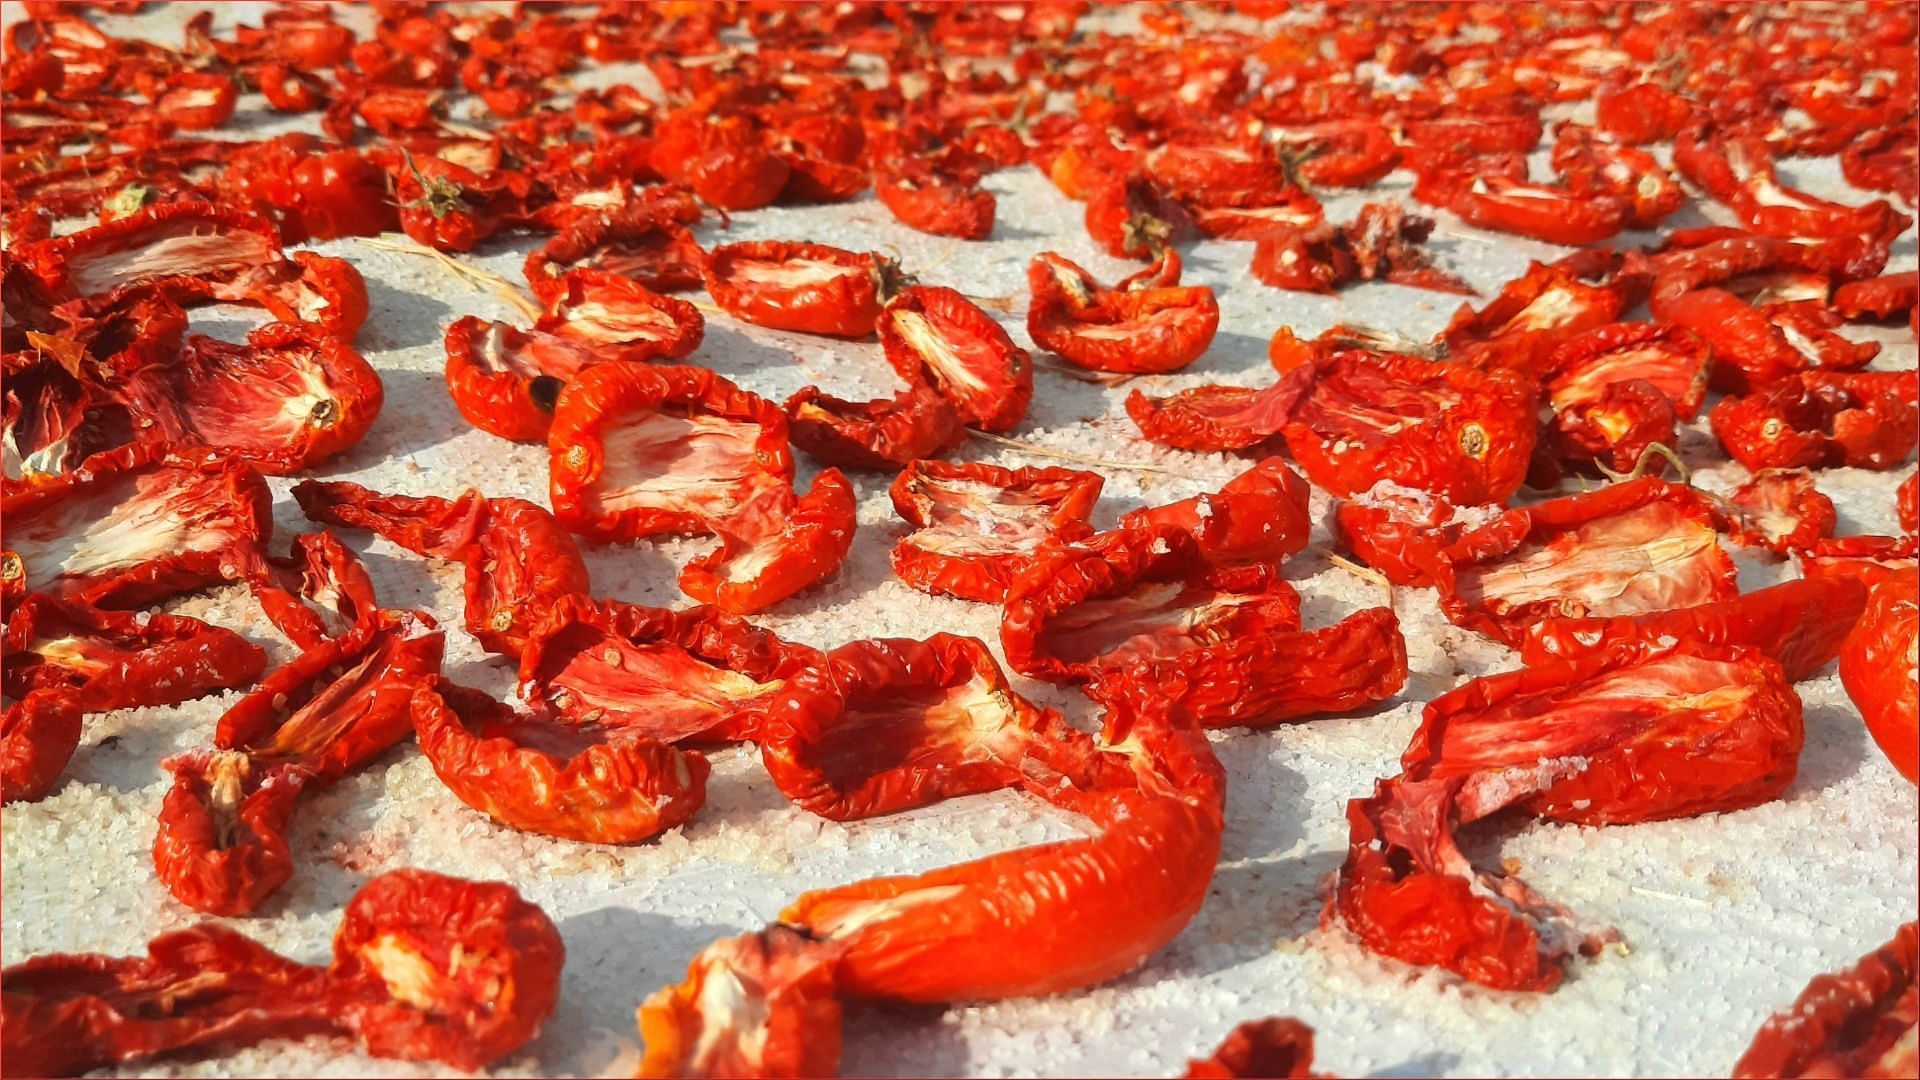 Global Veg Corp’s Sundried Tomatoes recall Reason, affected lot, and more